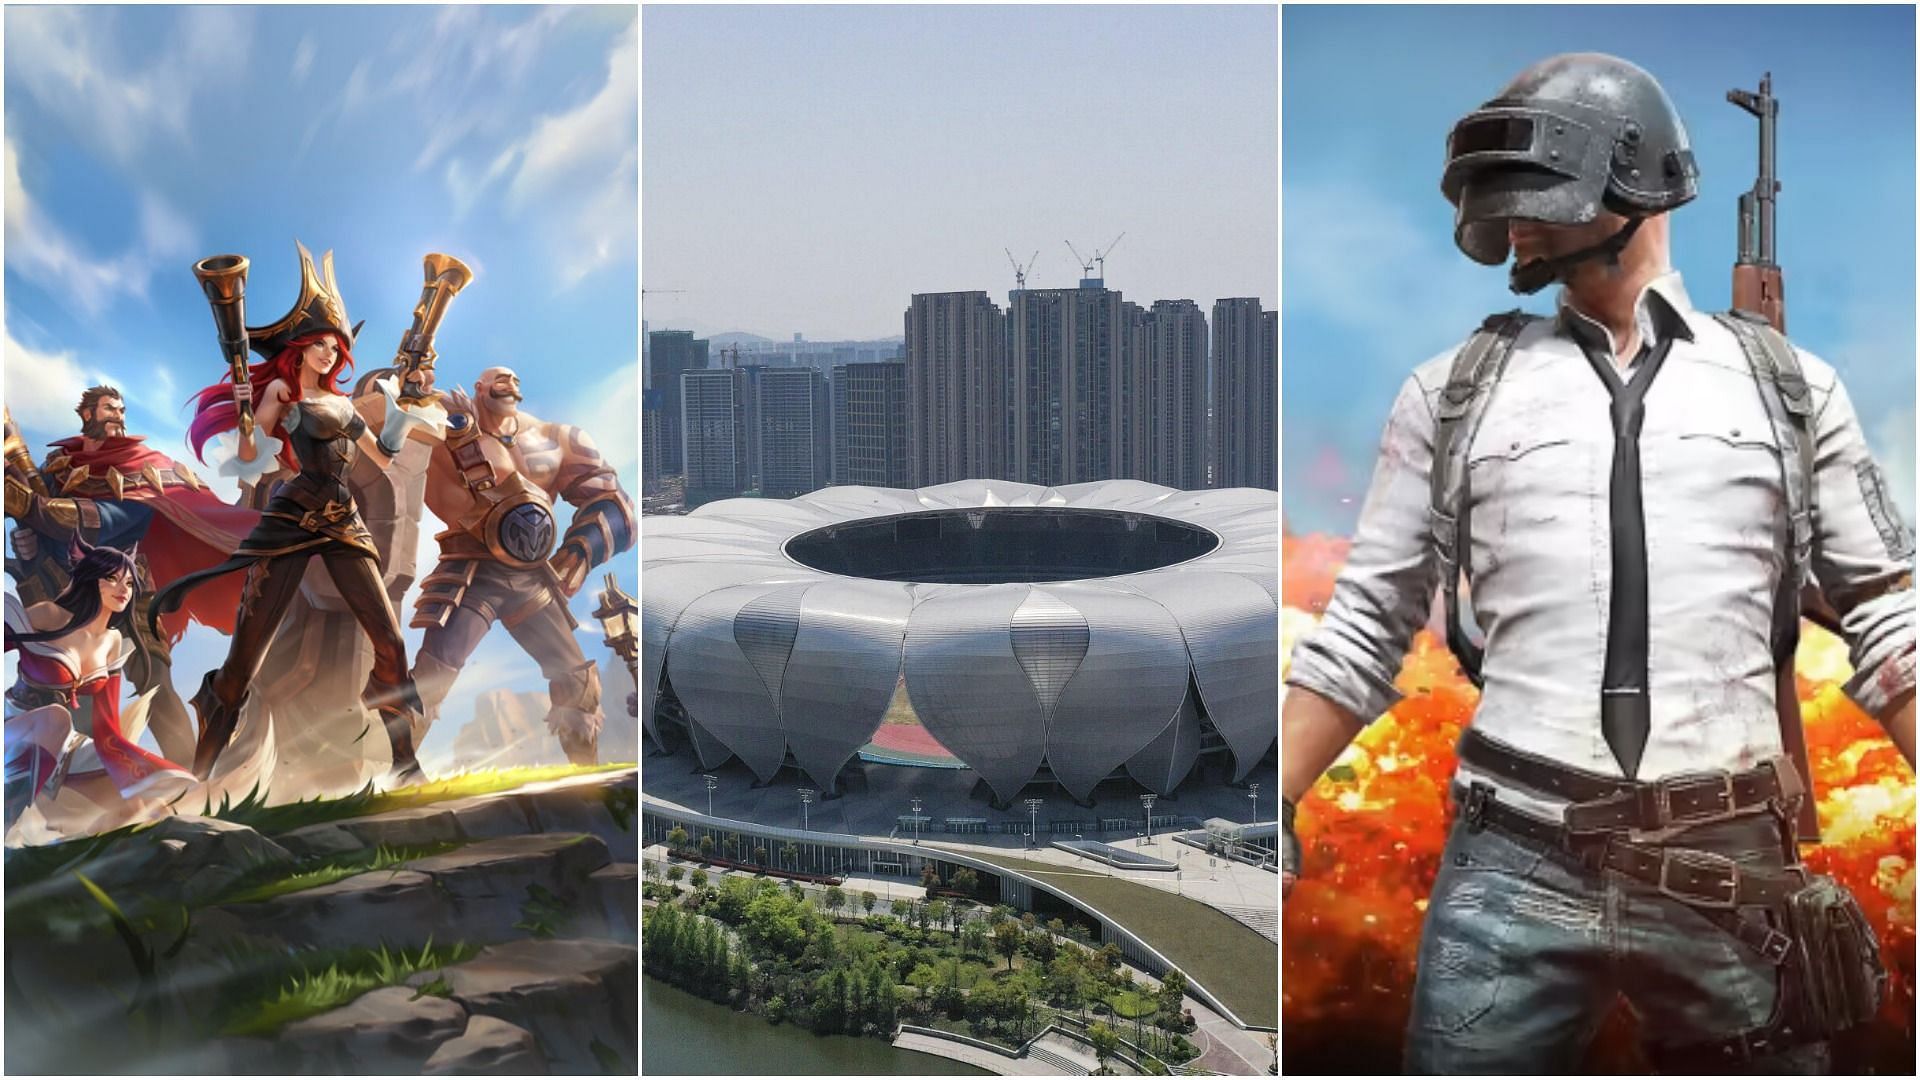 The Asian Games 2022 has games like League of Legends and PUBG Mobile as medal categories (Images via Riot, Krafton, Asian Games)